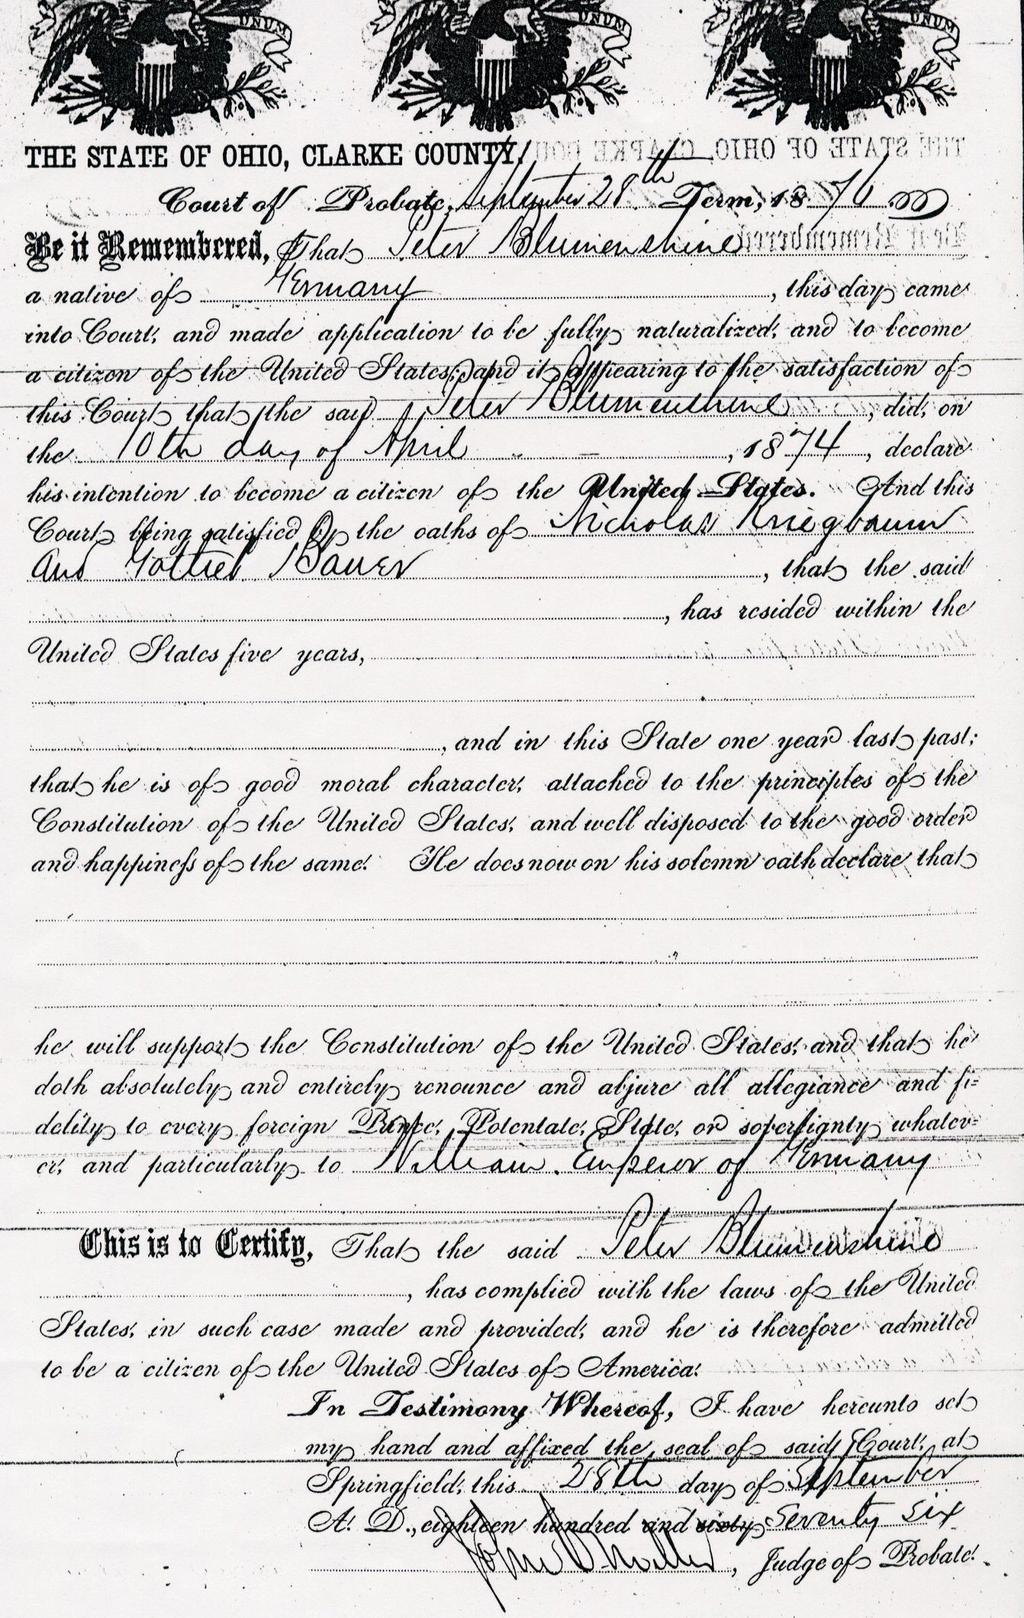 Naturalization papers for Peter Blumenschein, with